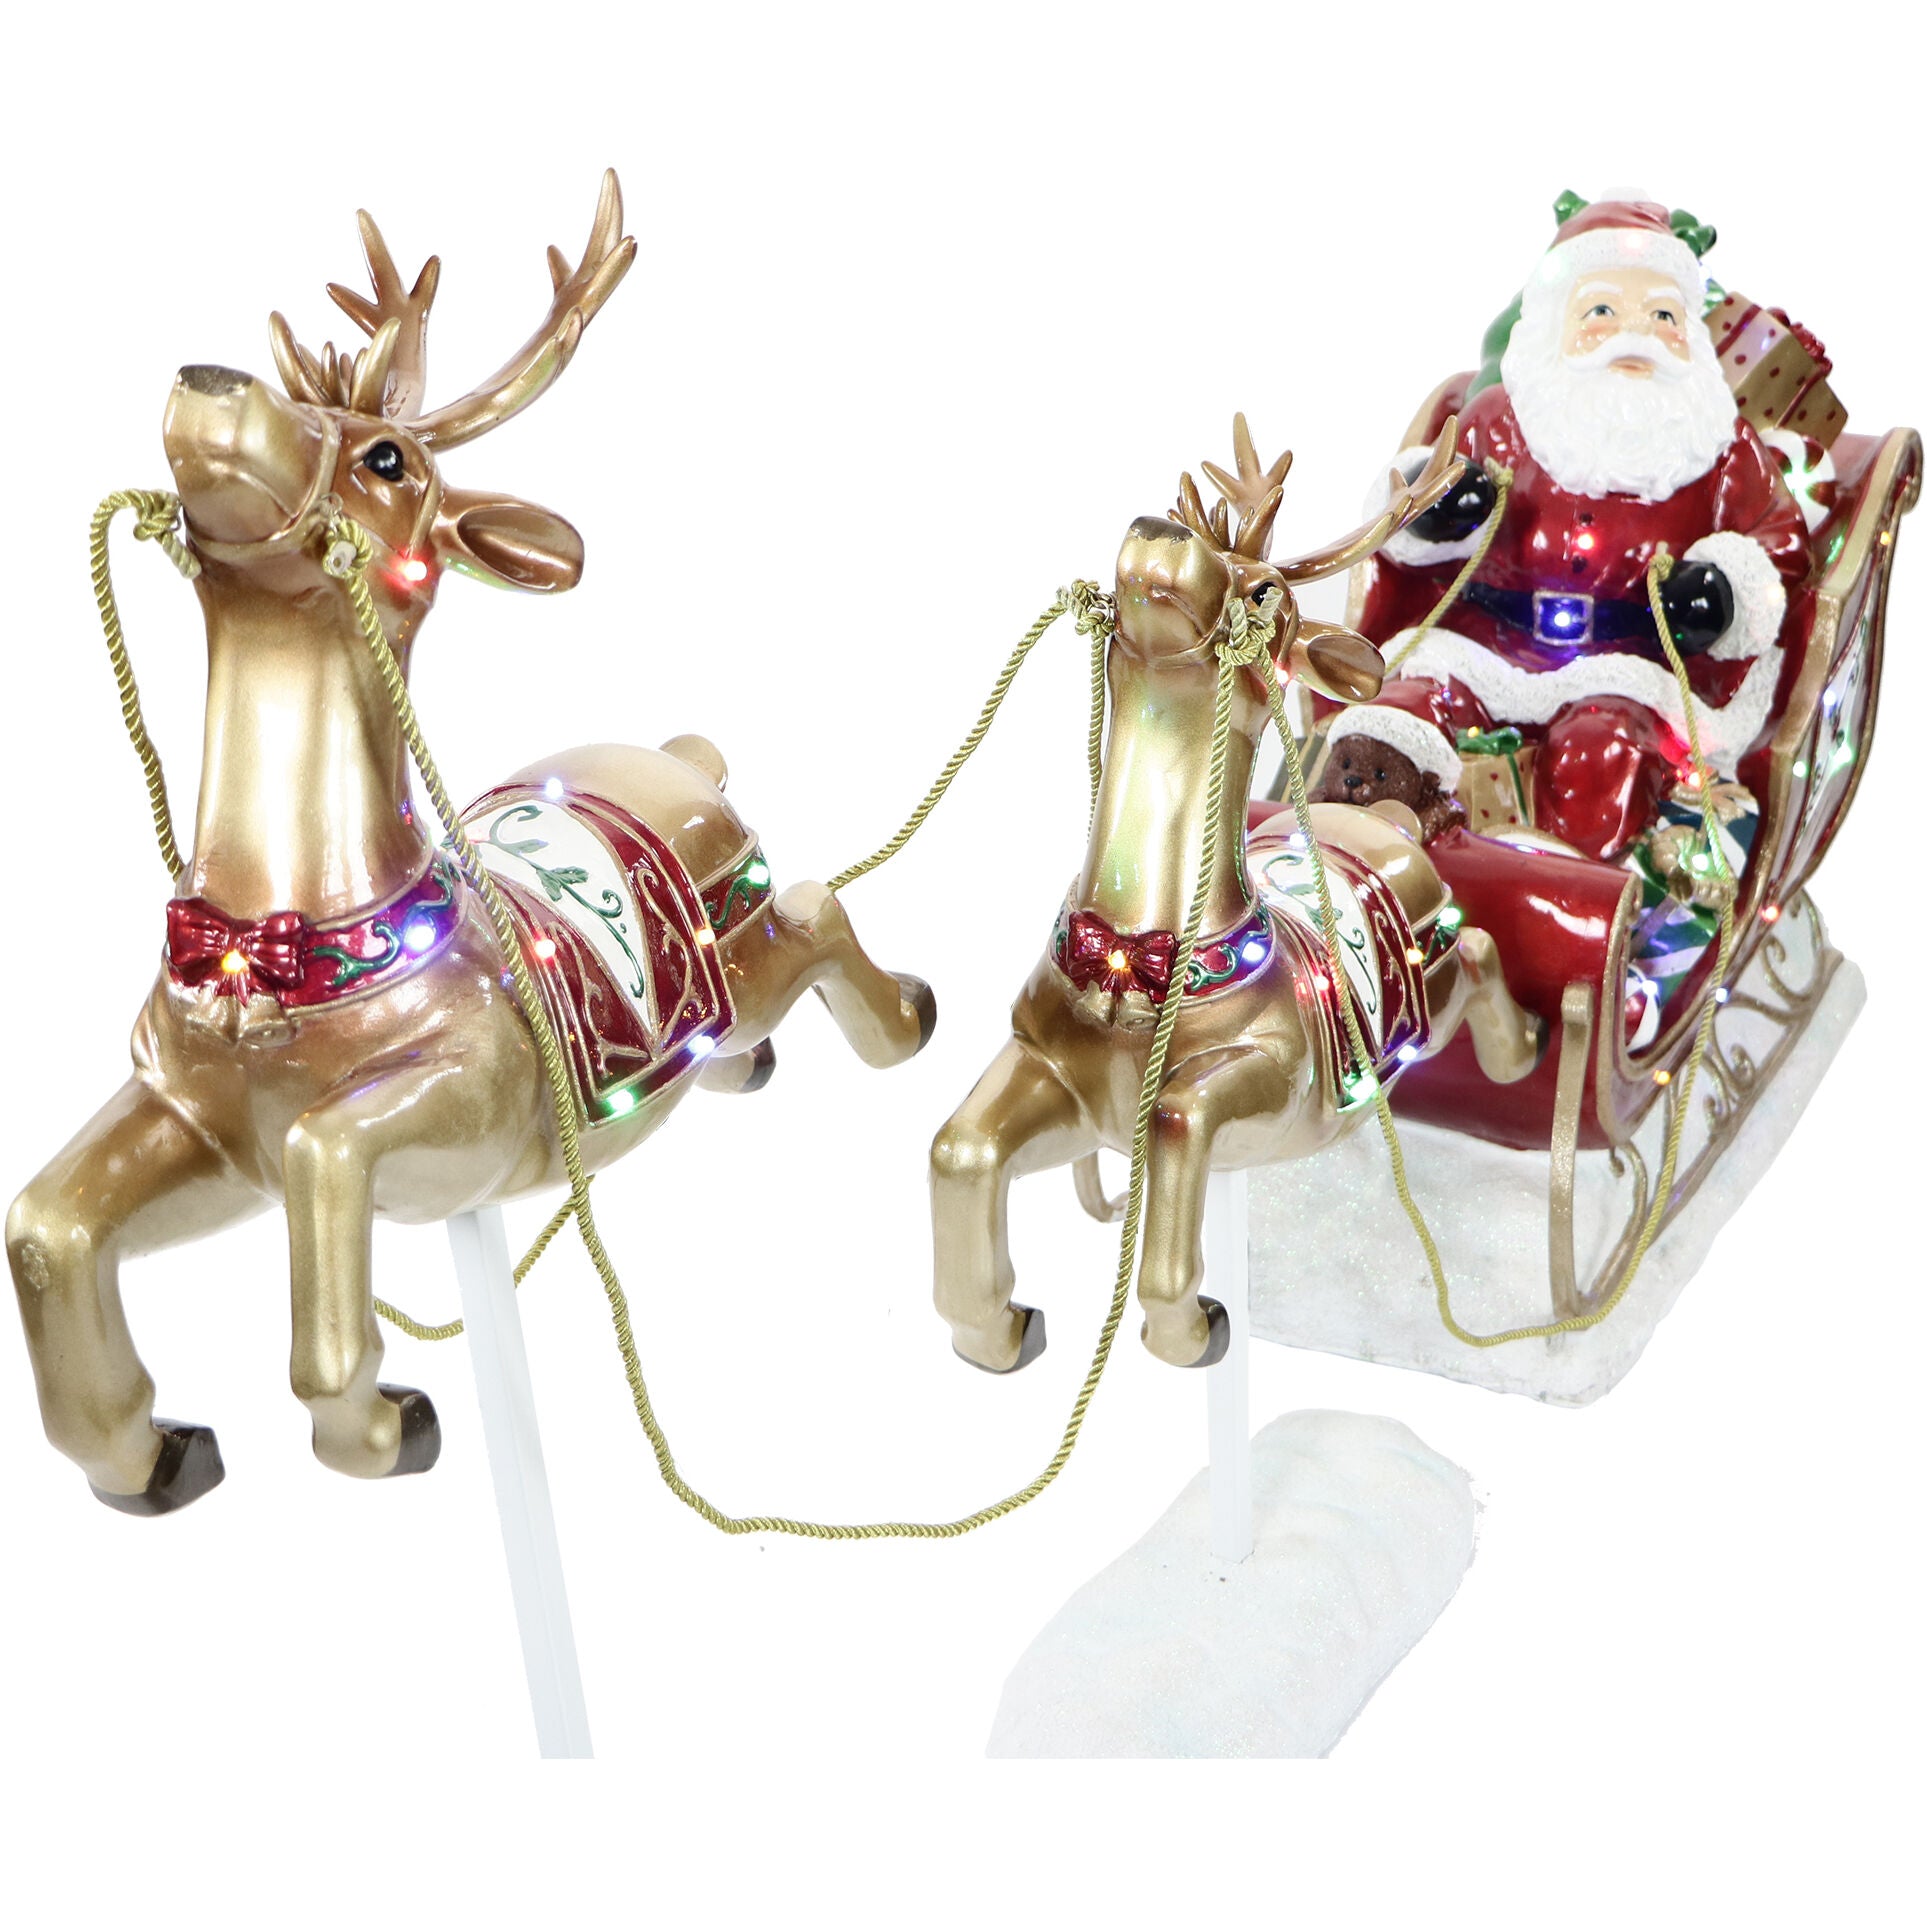 Fraser Hill Farm -  Indoor/Outdoor Oversized Christmas Decor with Long-Lasting LED Lights, Santa Sleigh and Flying Reindeer 3-Piece Set